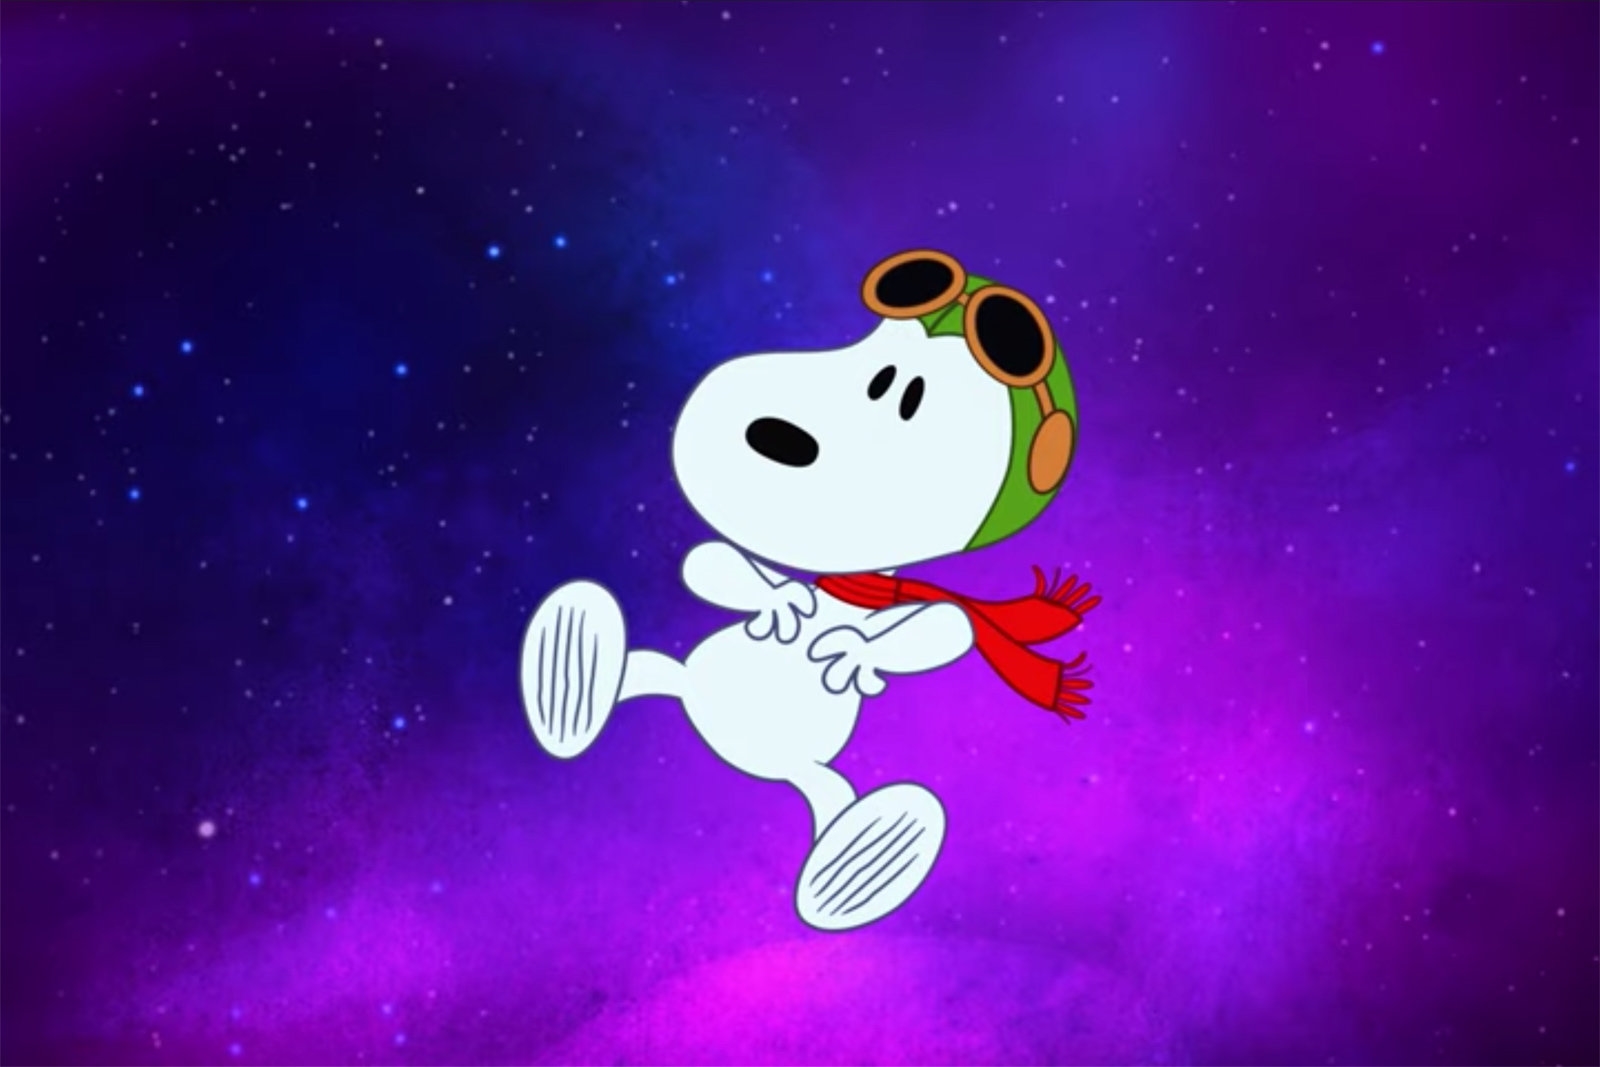 Apple previews its 'Peanuts' series 'Snoopy in Space' | DeviceDaily.com